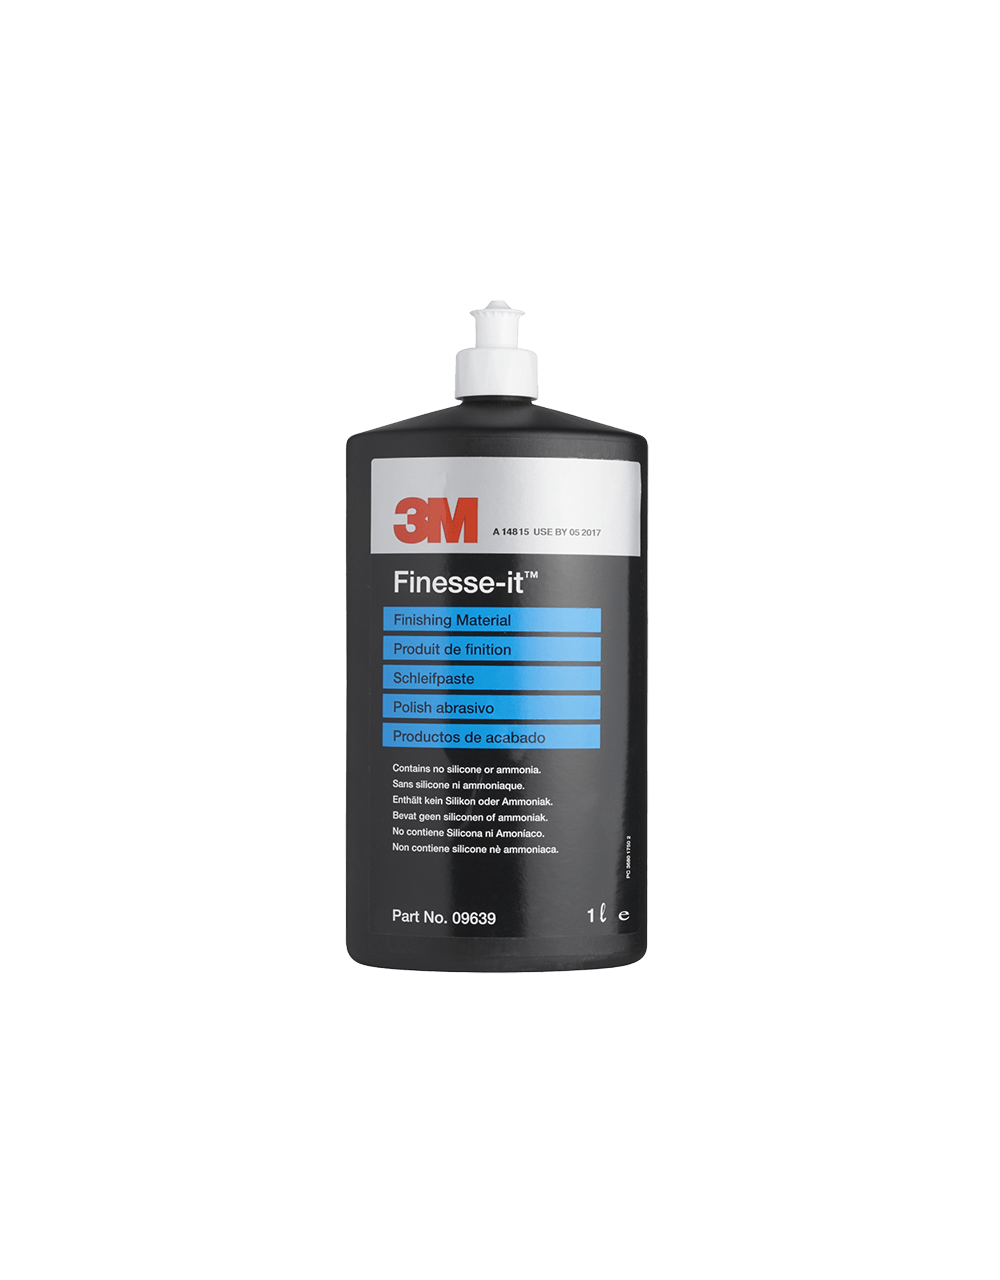 3M Finesse-it Finishing Material